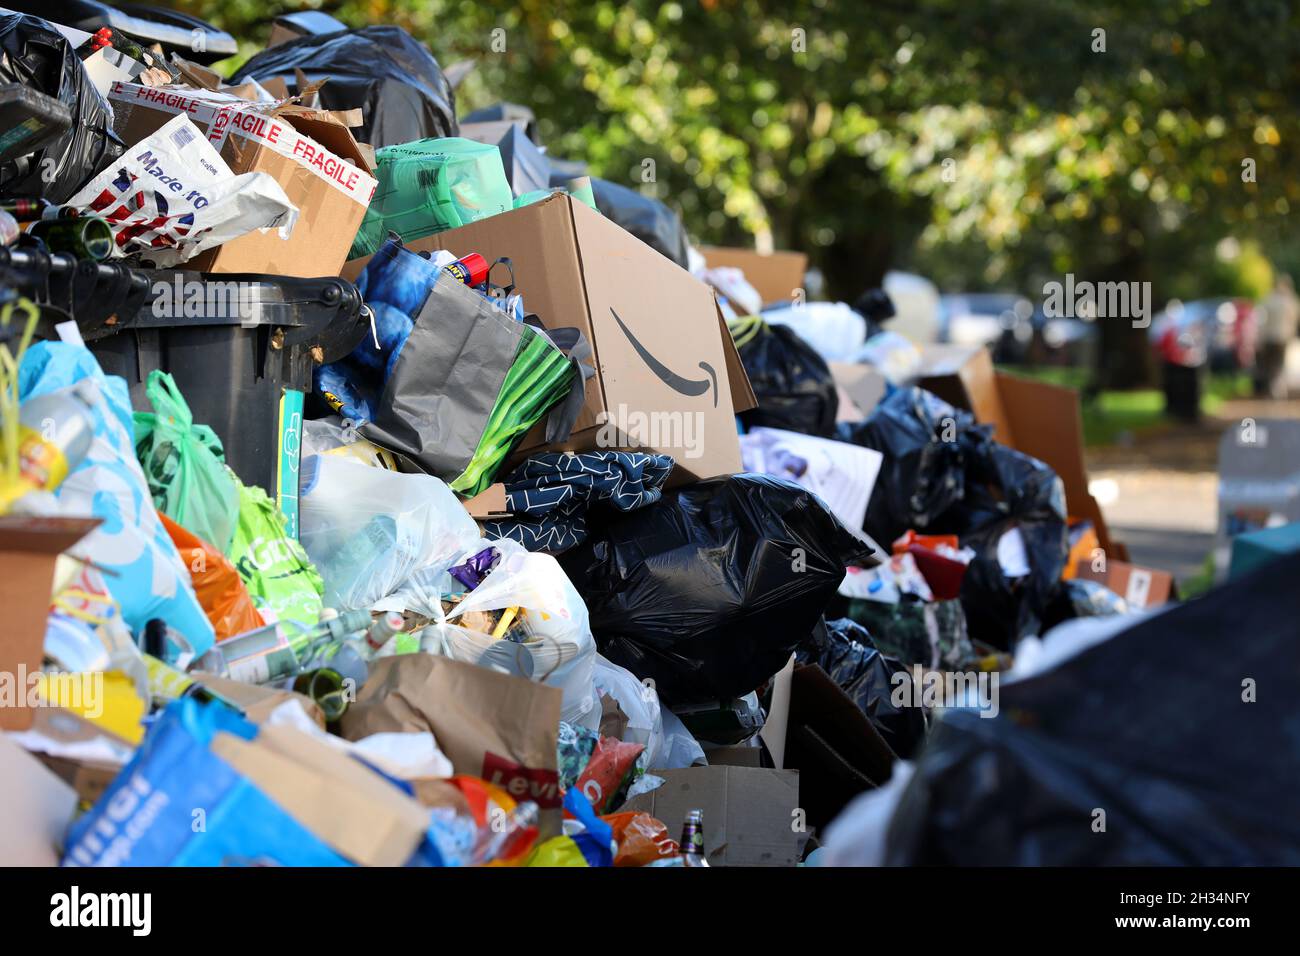 Huge piles of rubbish piled up next to bins in Brighton, East Sussex, UK, during the bin man strike when unions were fighting with the Green party. Stock Photo